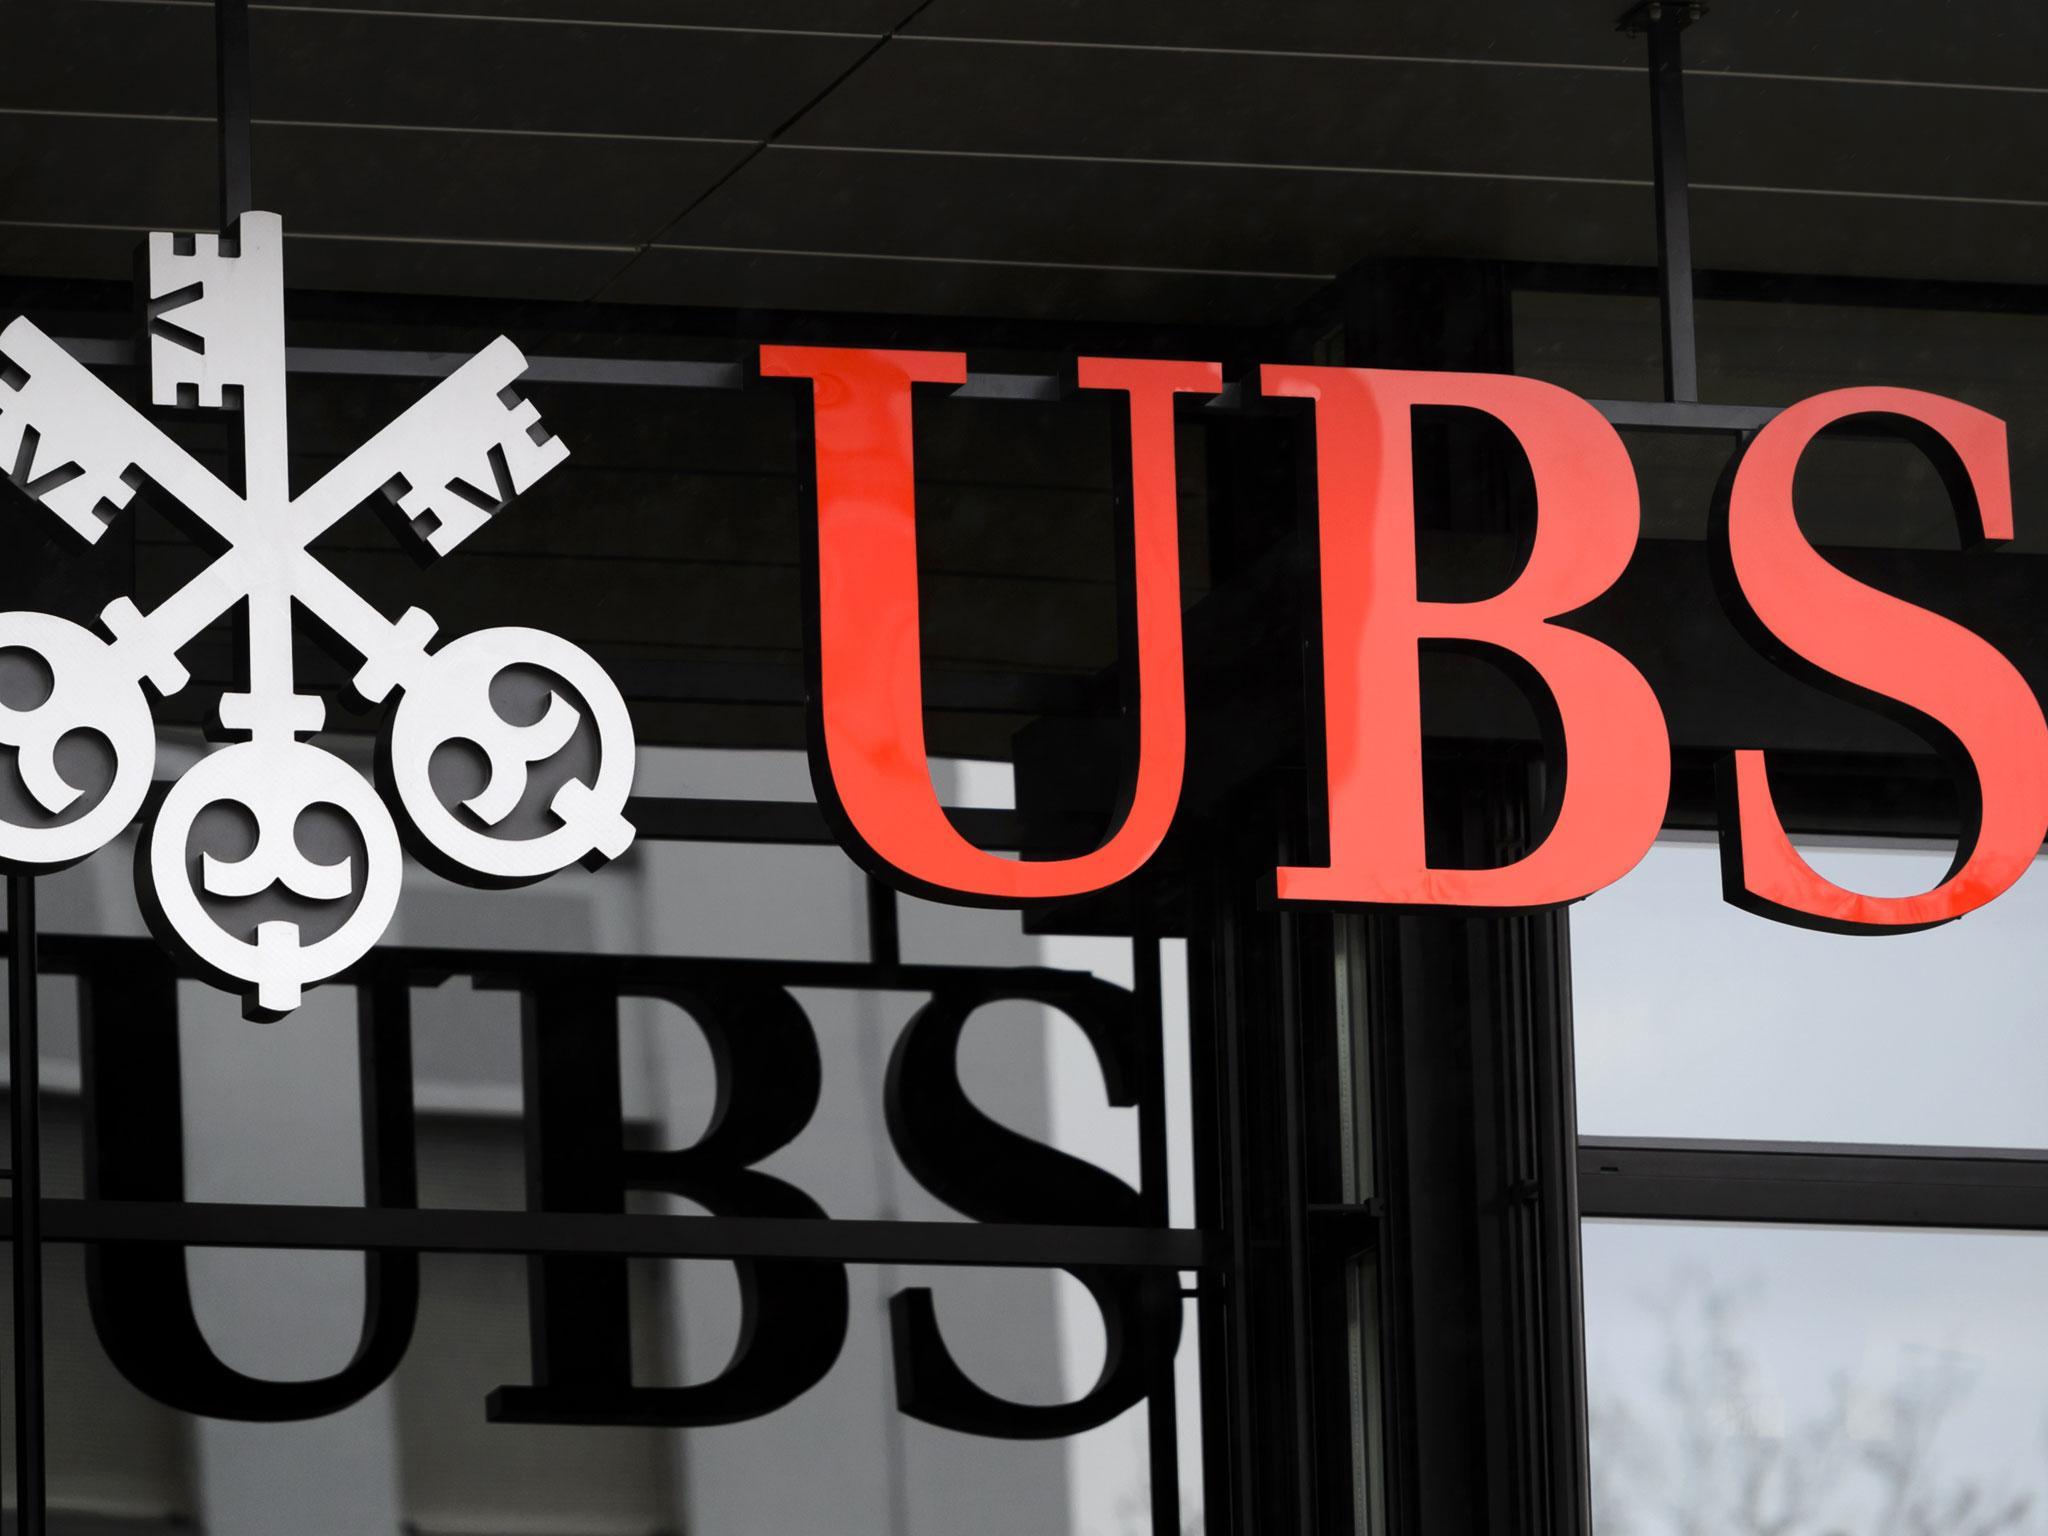 UBS currently employs 5,000 people in London and the location of where staff would be moved remains unclear